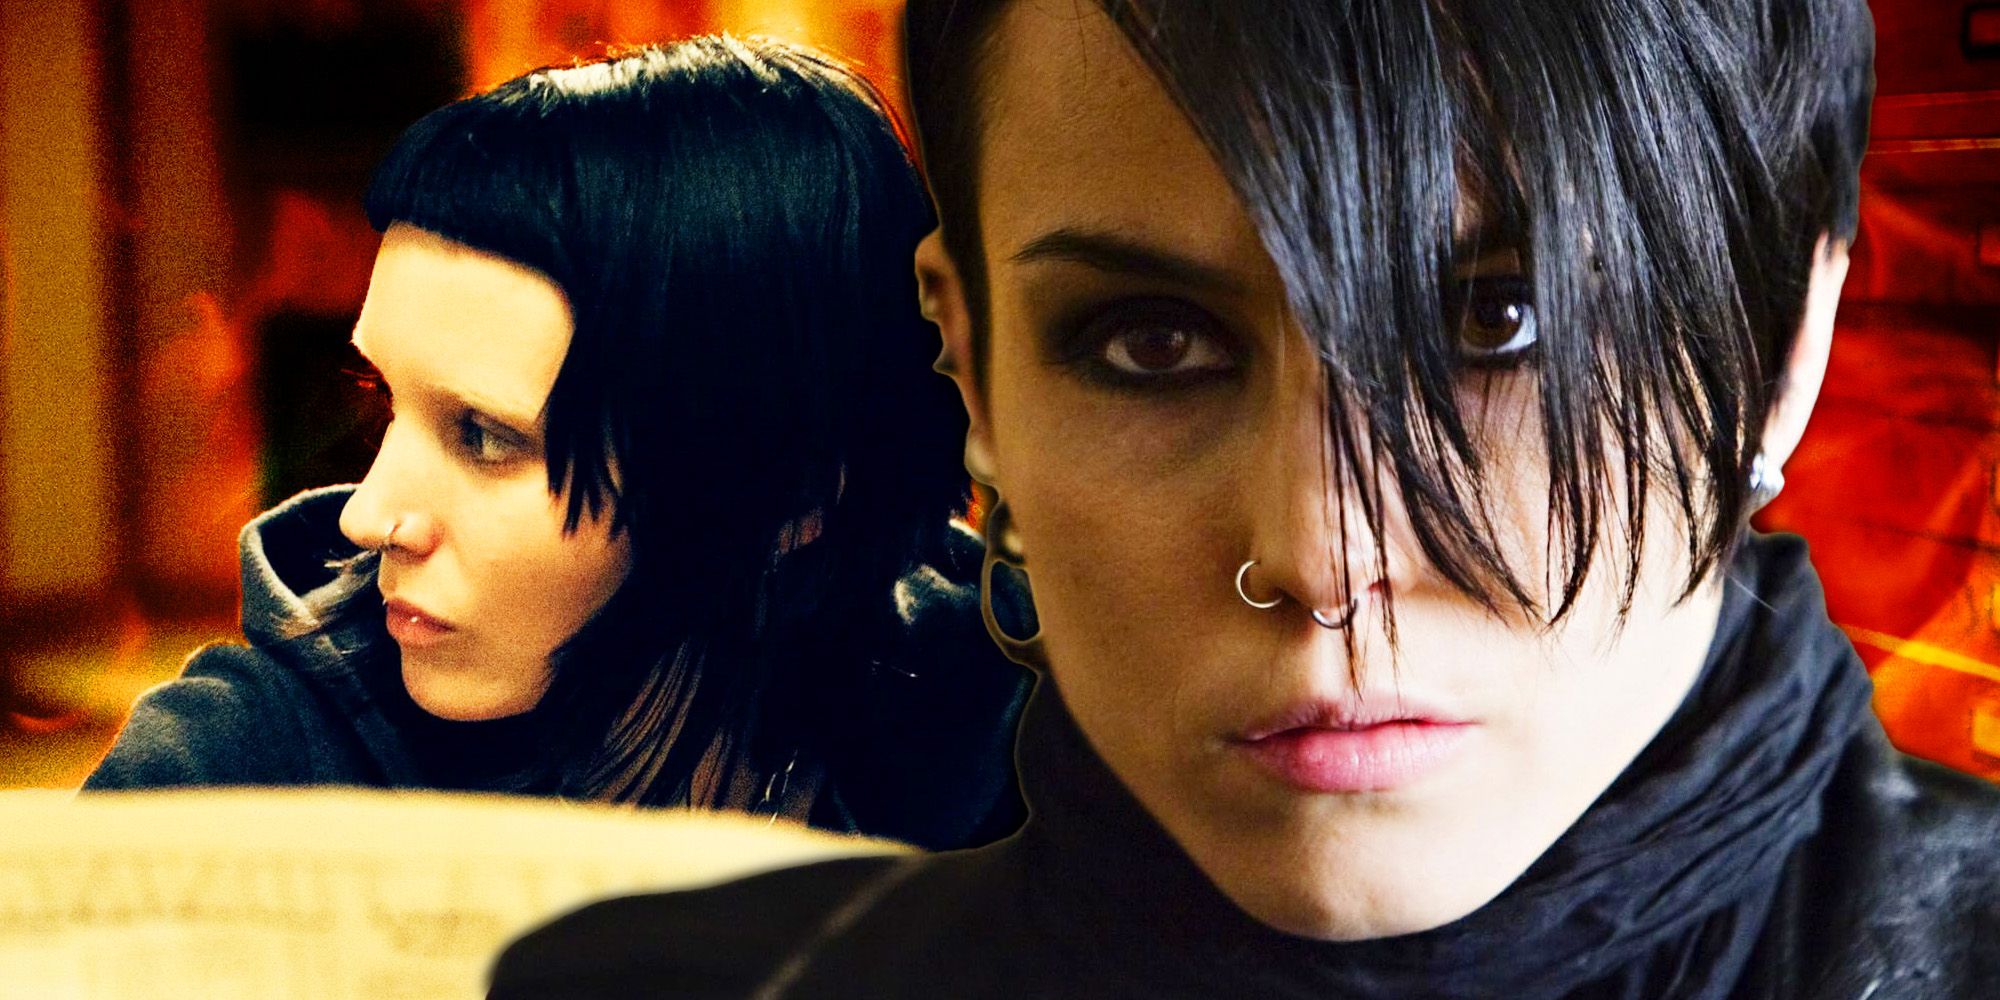 Rooney Mara and Noomi Rapace from The Girl With The Dragon Tattoo